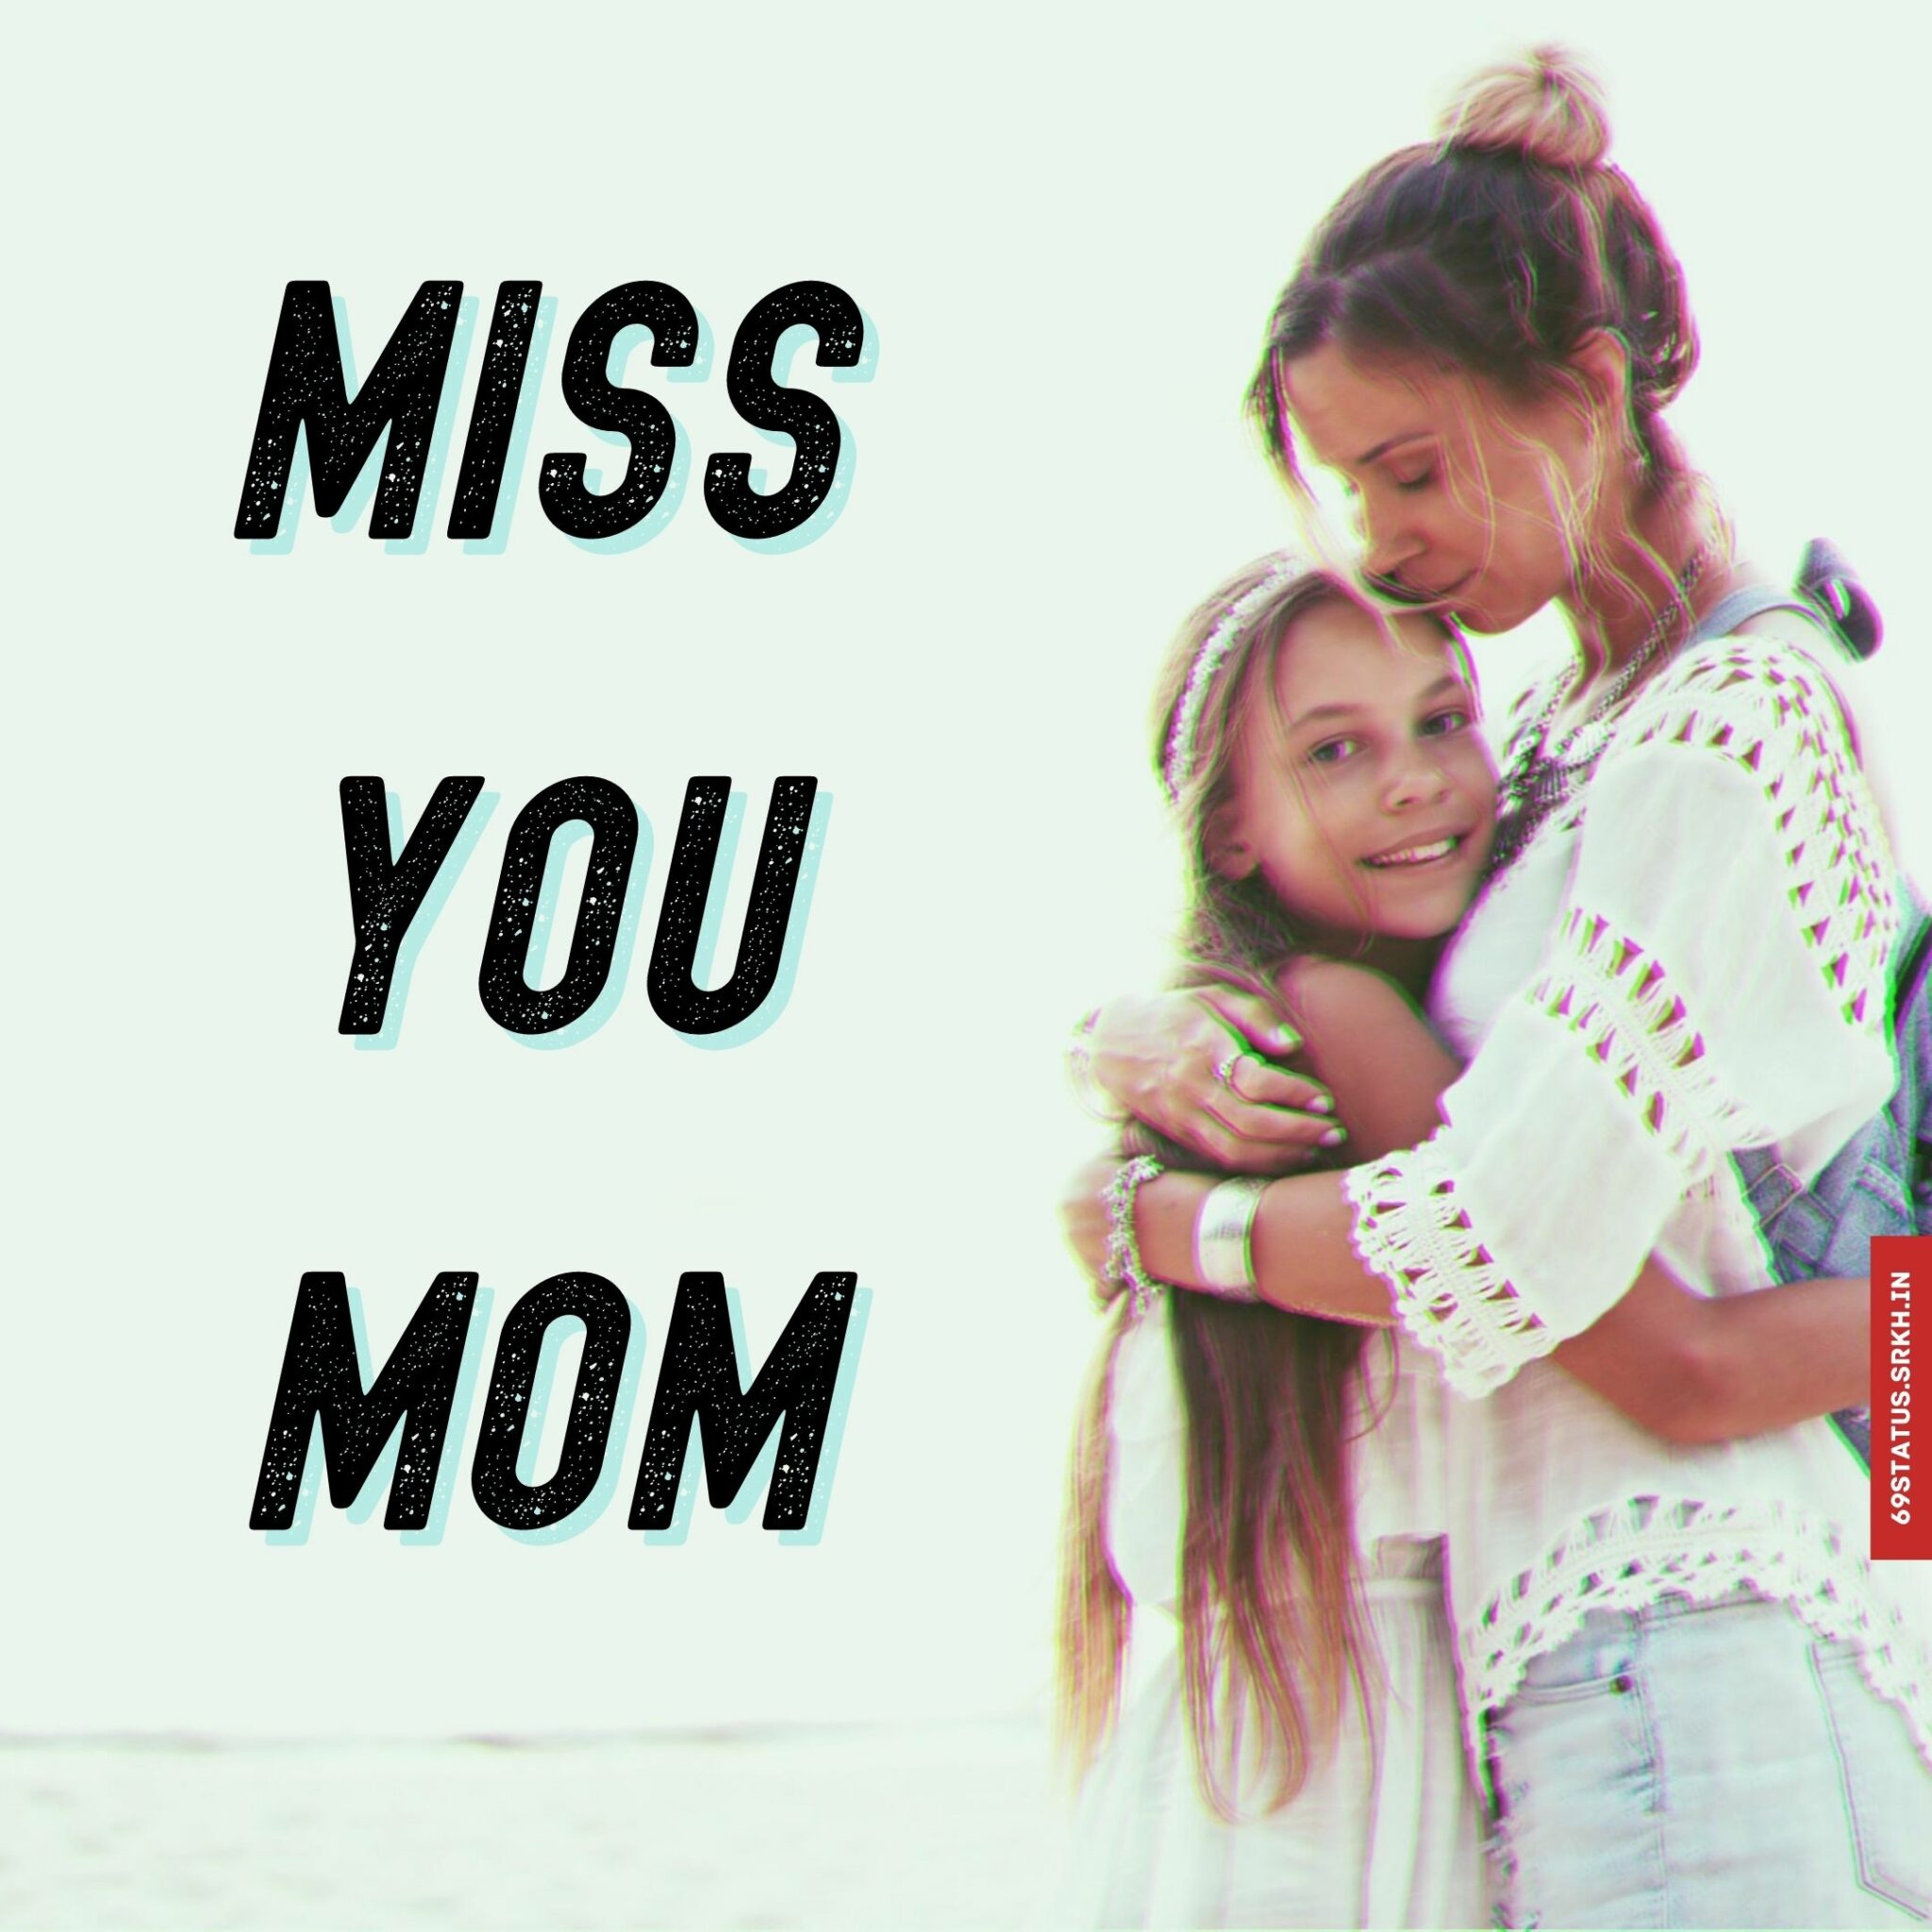 Miss you mom images